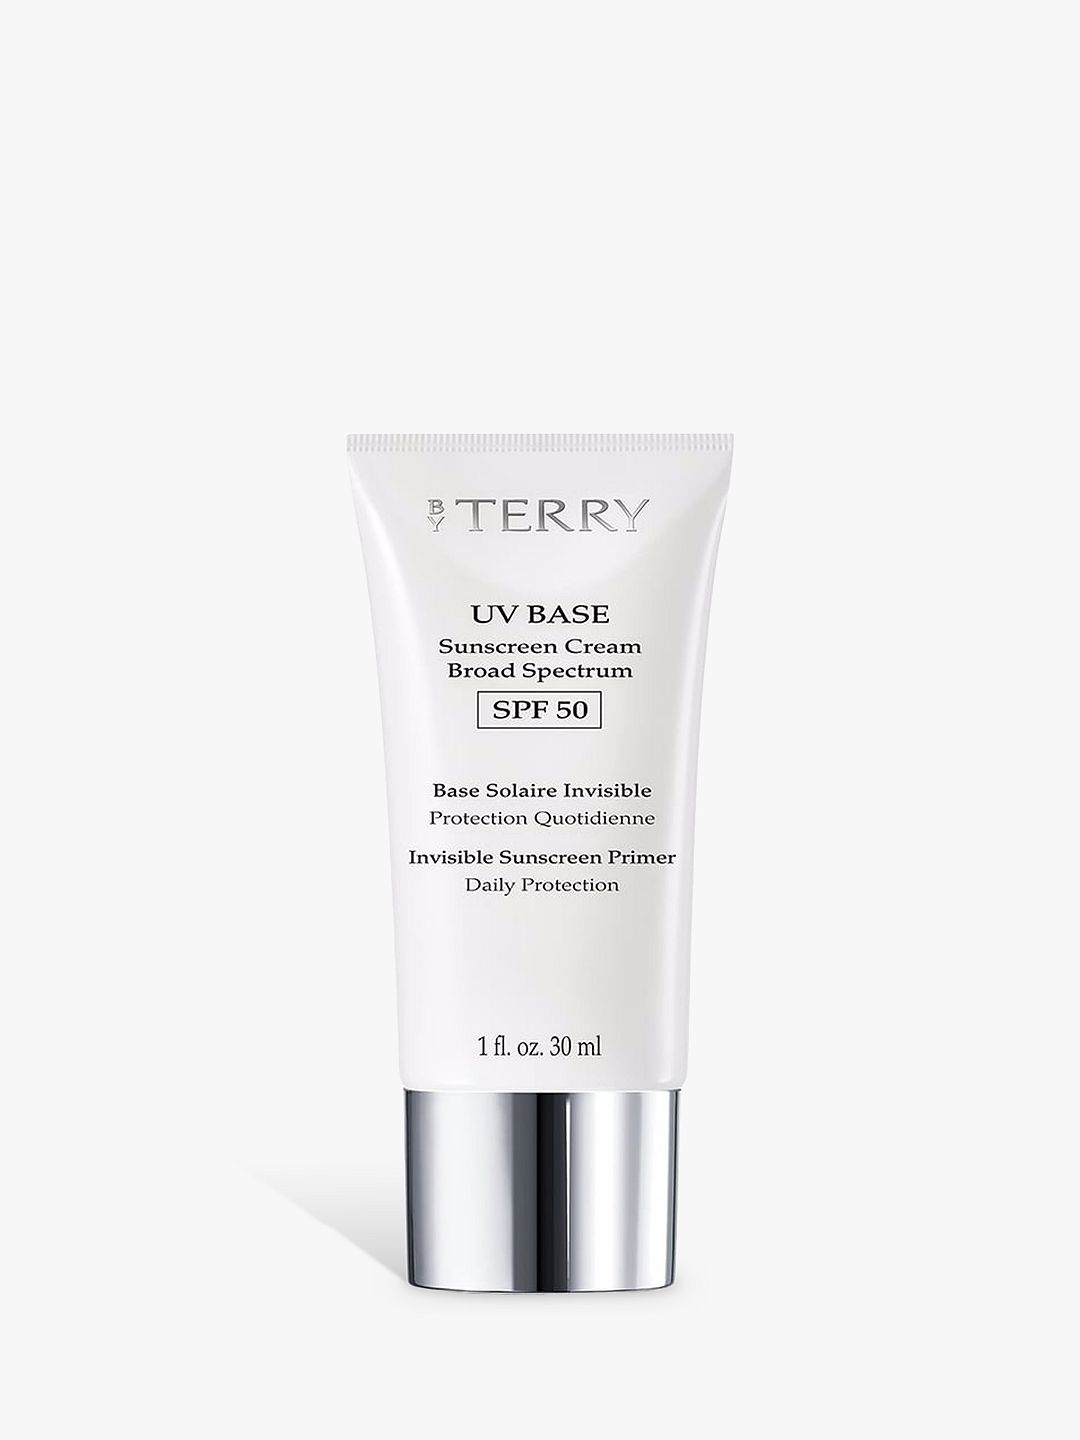 BY TERRY UV Base SPF 50 Invisible Sunscreen Primer, 30ml 1